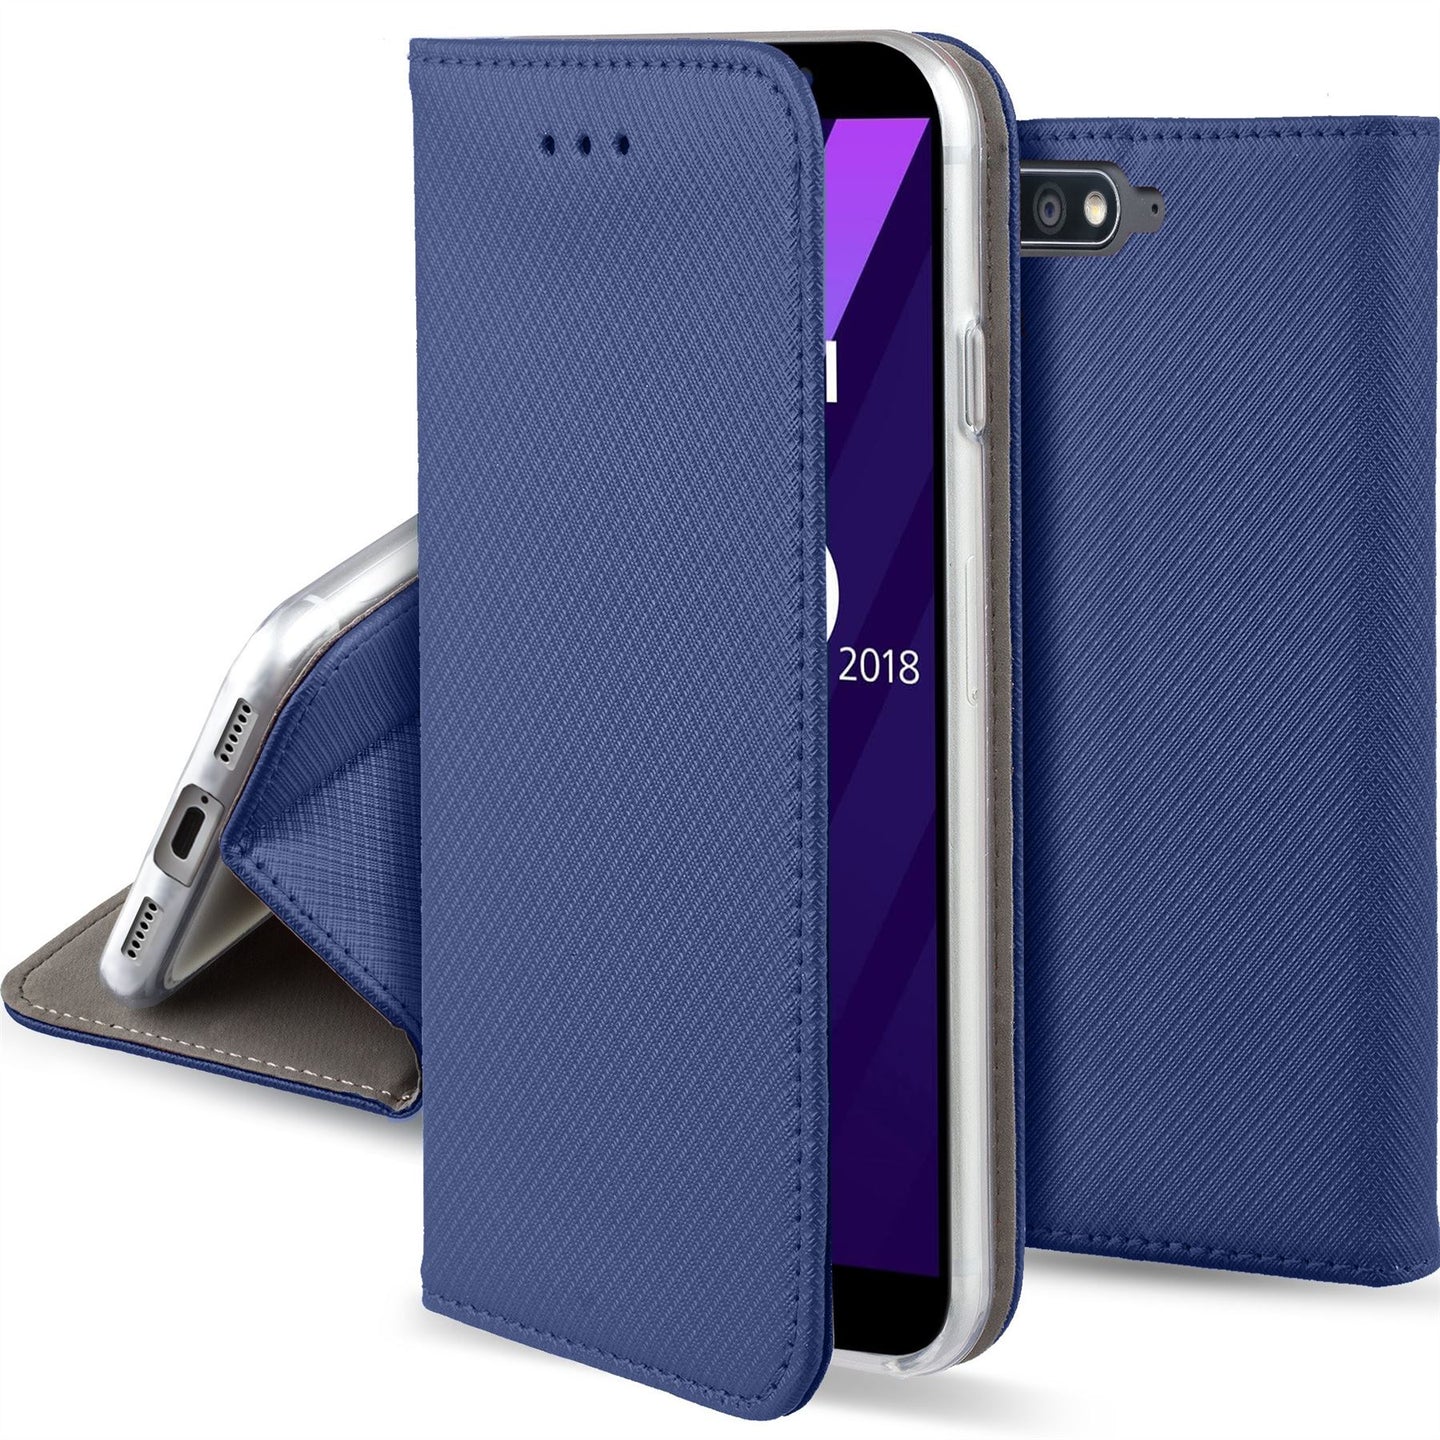 Moozy Case Flip Cover for Huawei Y6 2018, Dark Blue - Smart Magnetic Flip Case with Card Holder and Stand